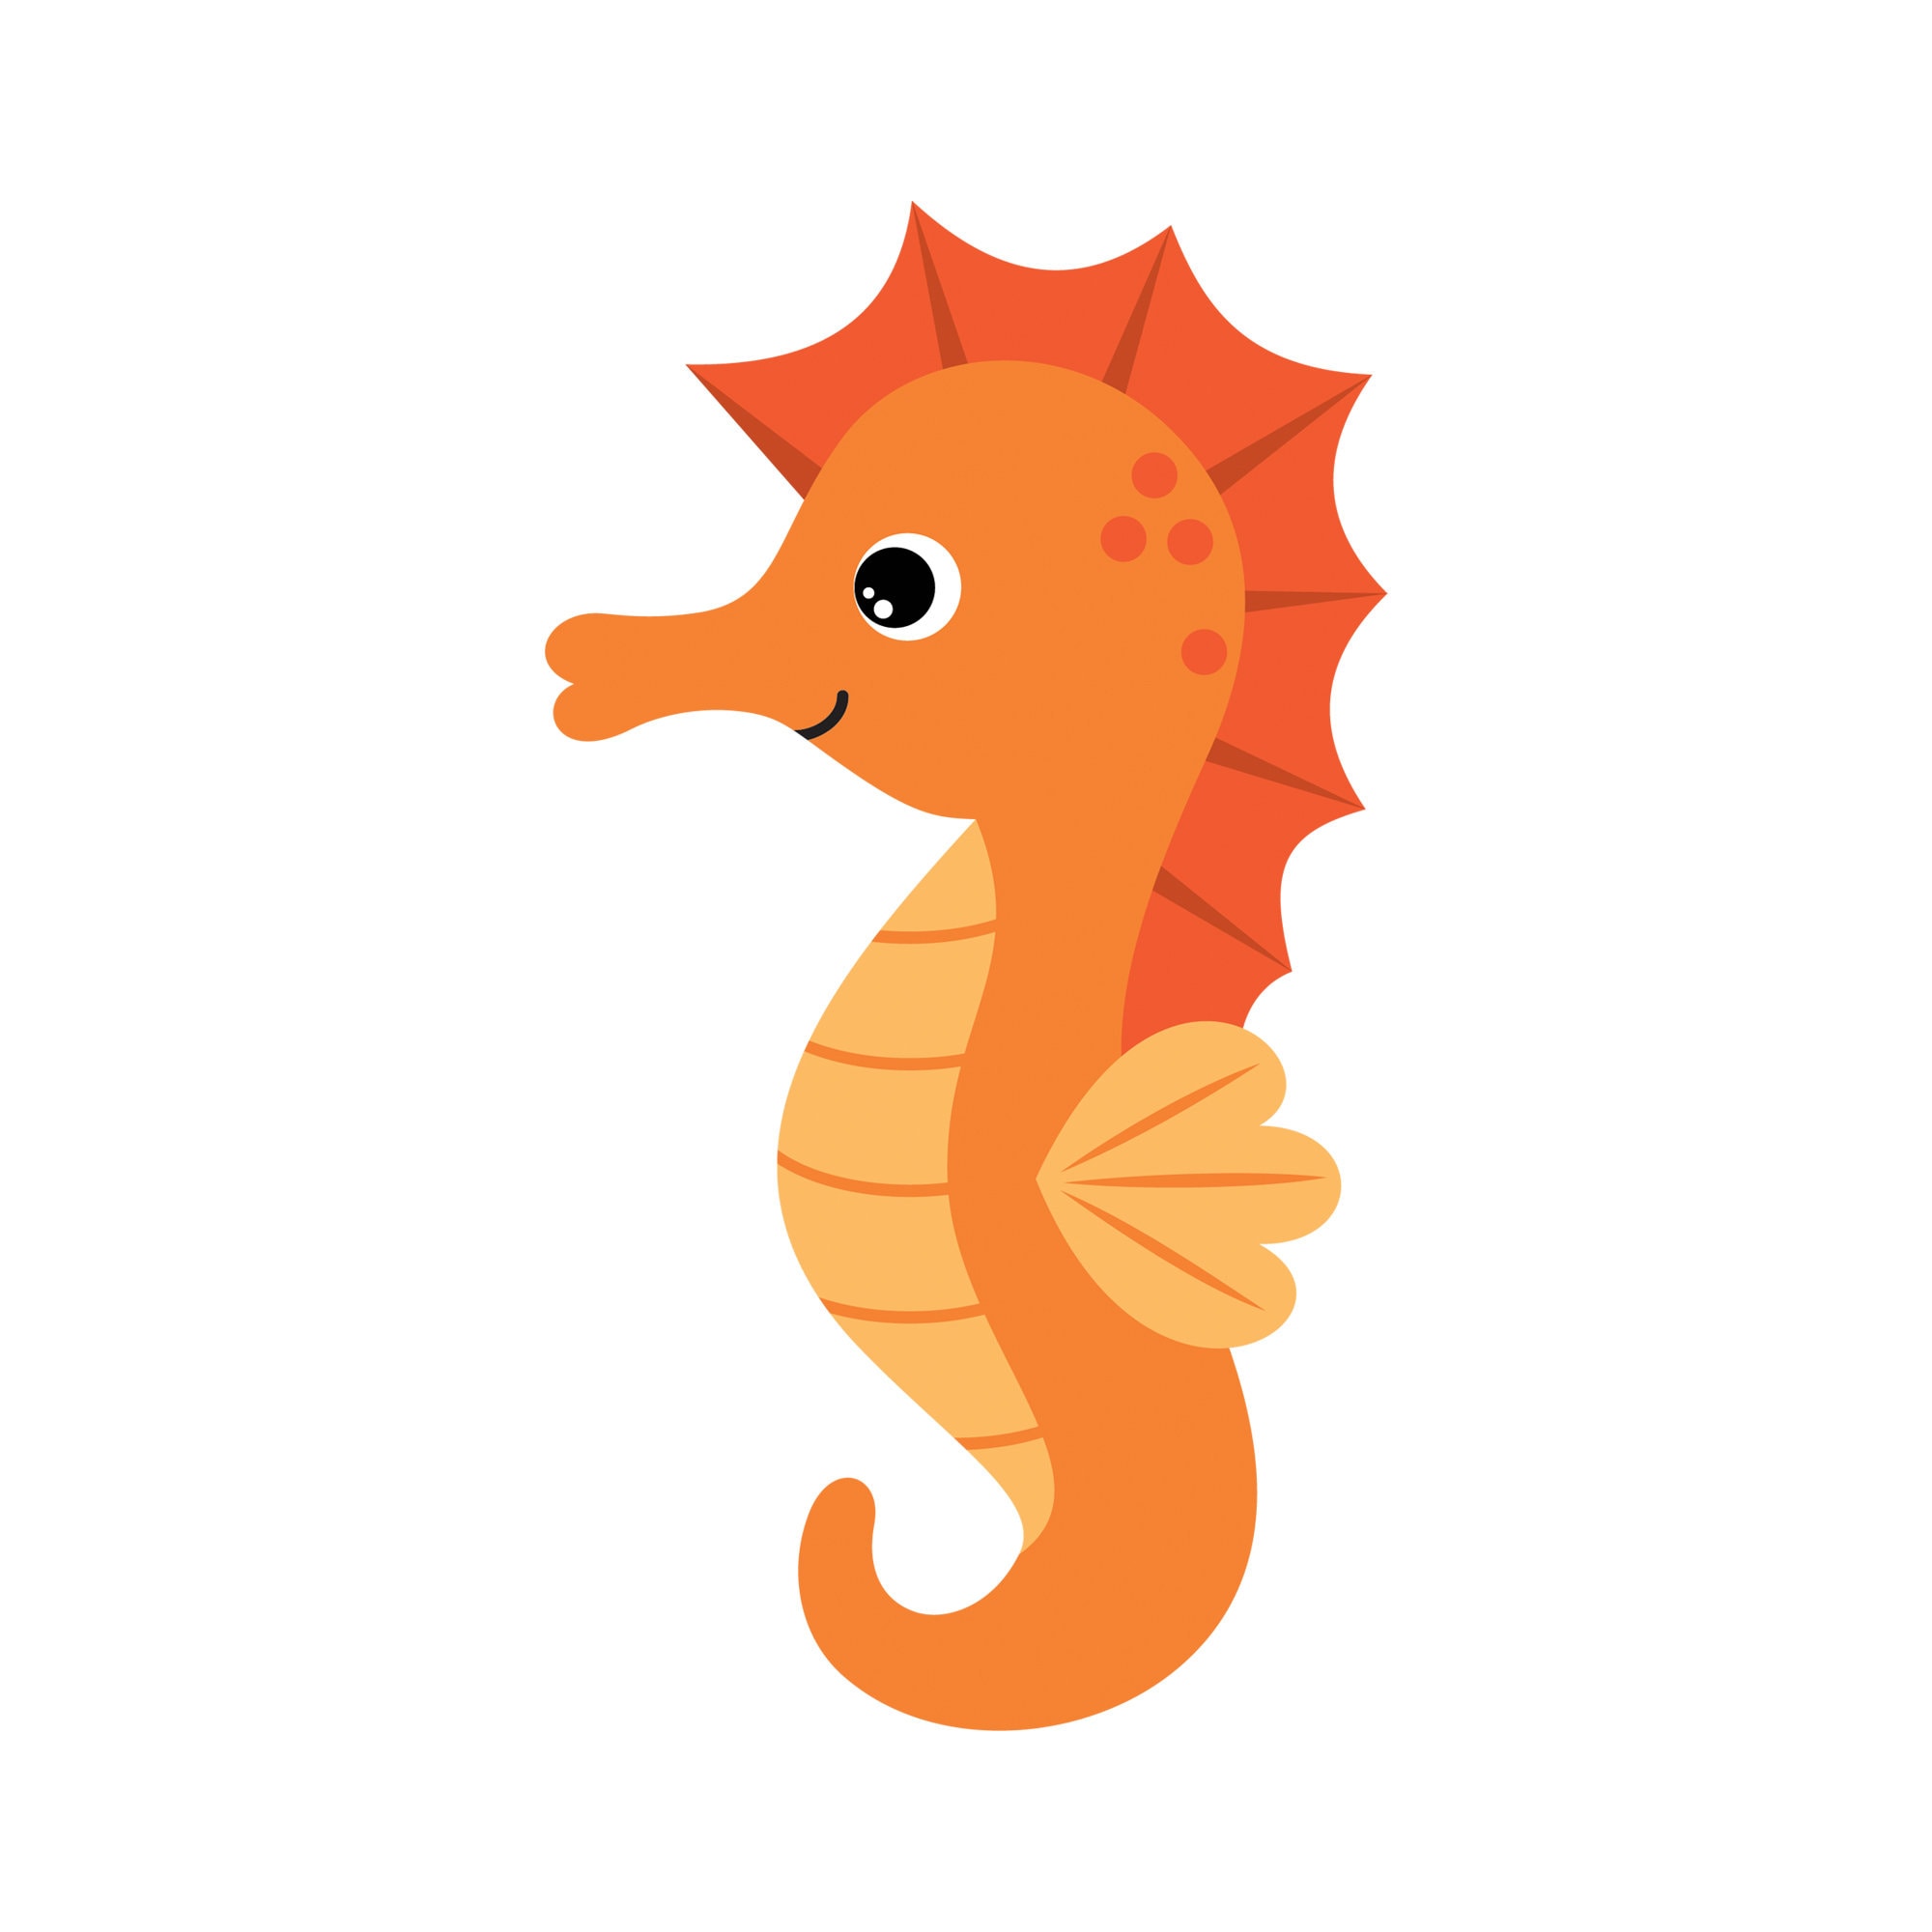 Sea Horse Hong Horse Etsy Images, - Graphic. Kong Digital Download. Single Instant Clipart. Sea